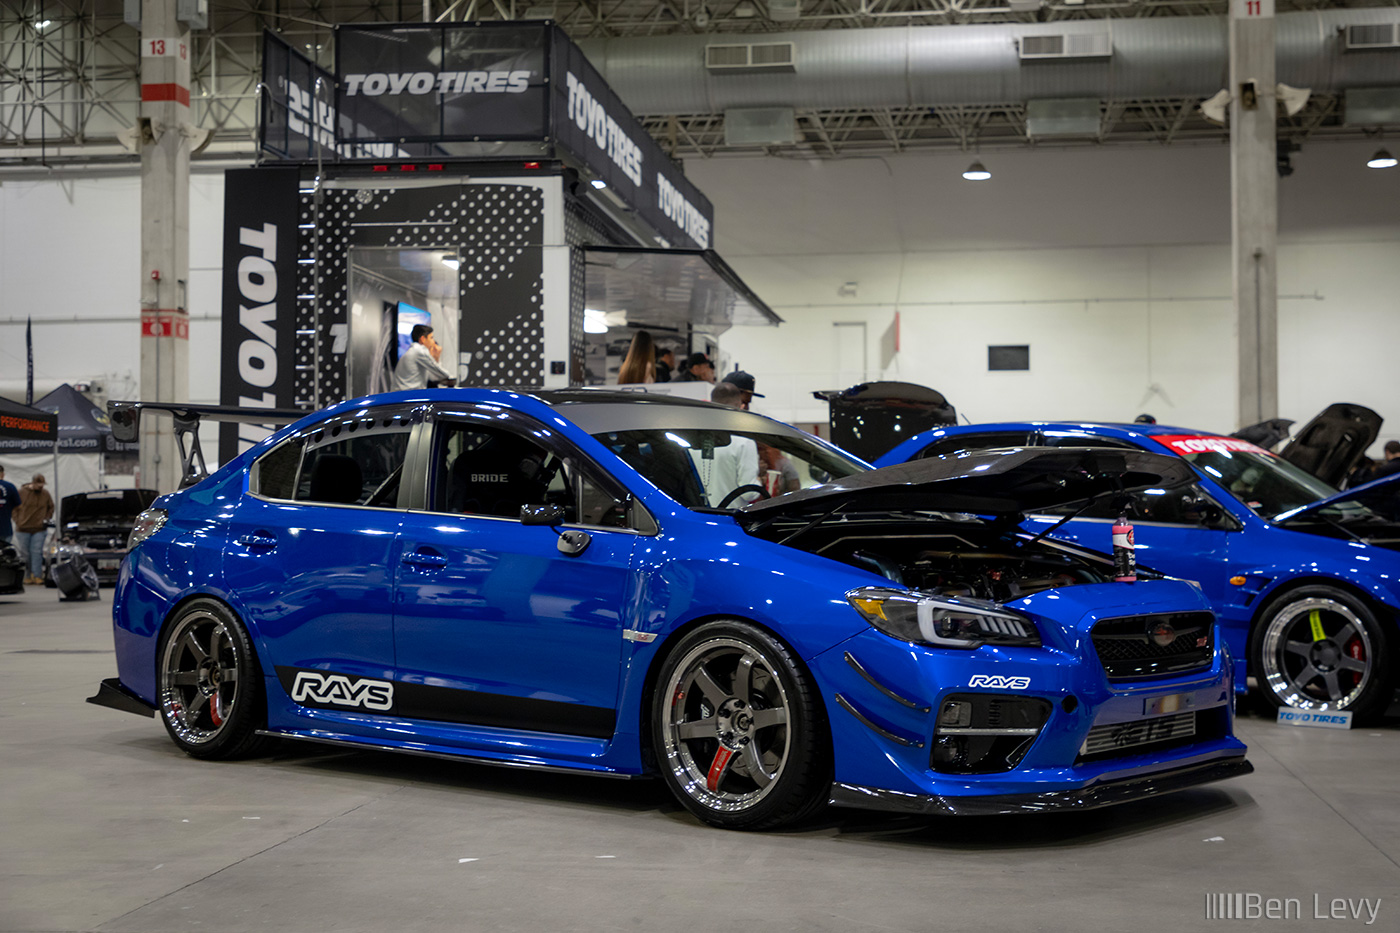 Blue Subaru WRX STI at the Toyo Booth at Wekfest Chicago